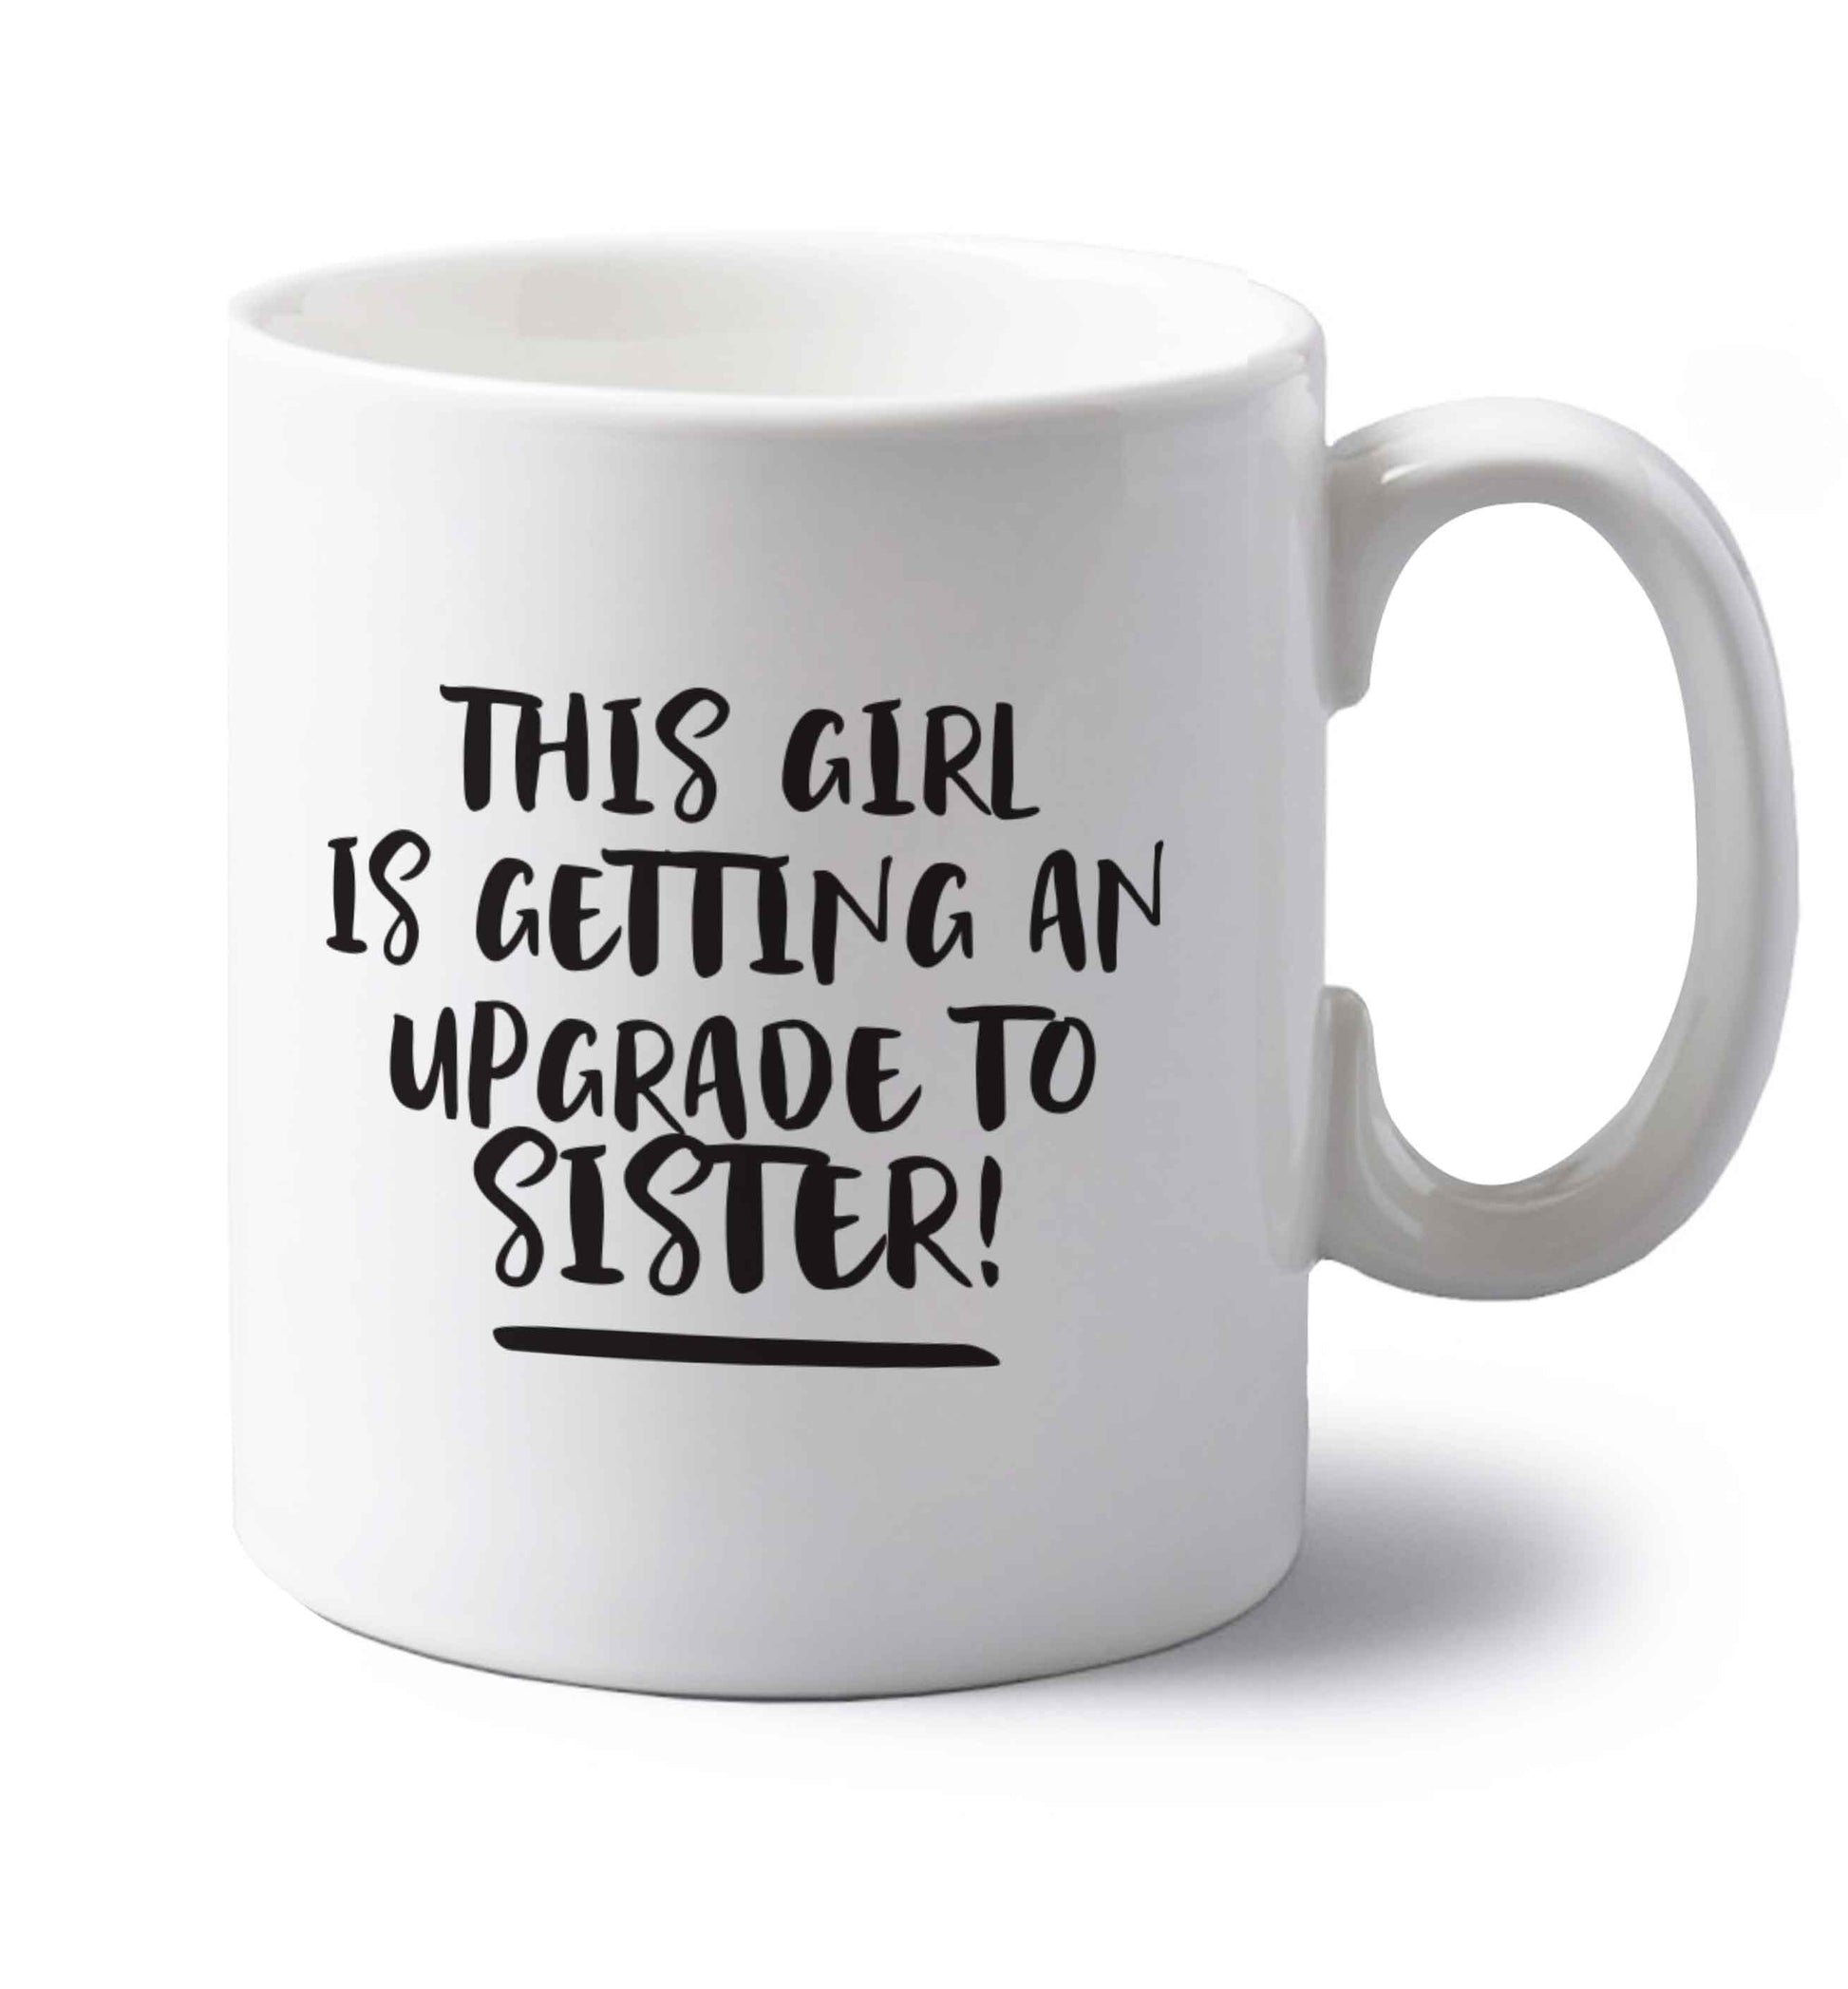 This girl is getting an upgrade to sister! left handed white ceramic mug 